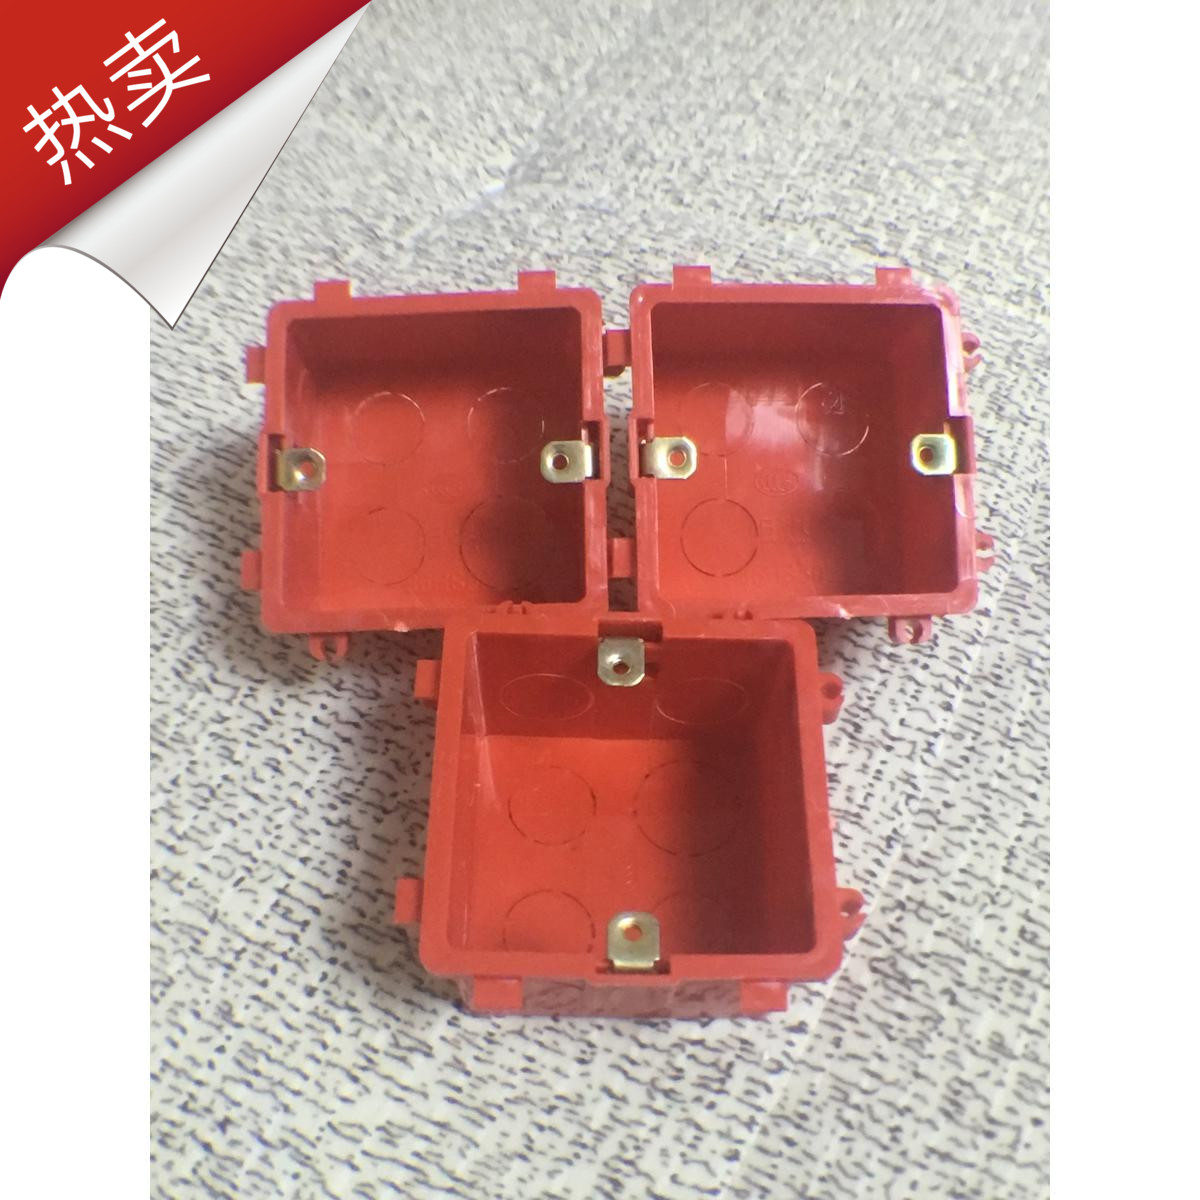 Bottom box self-fastening and concealed PVC junction box switch socket 86 bottom box bottom-closing and embedded box assembling